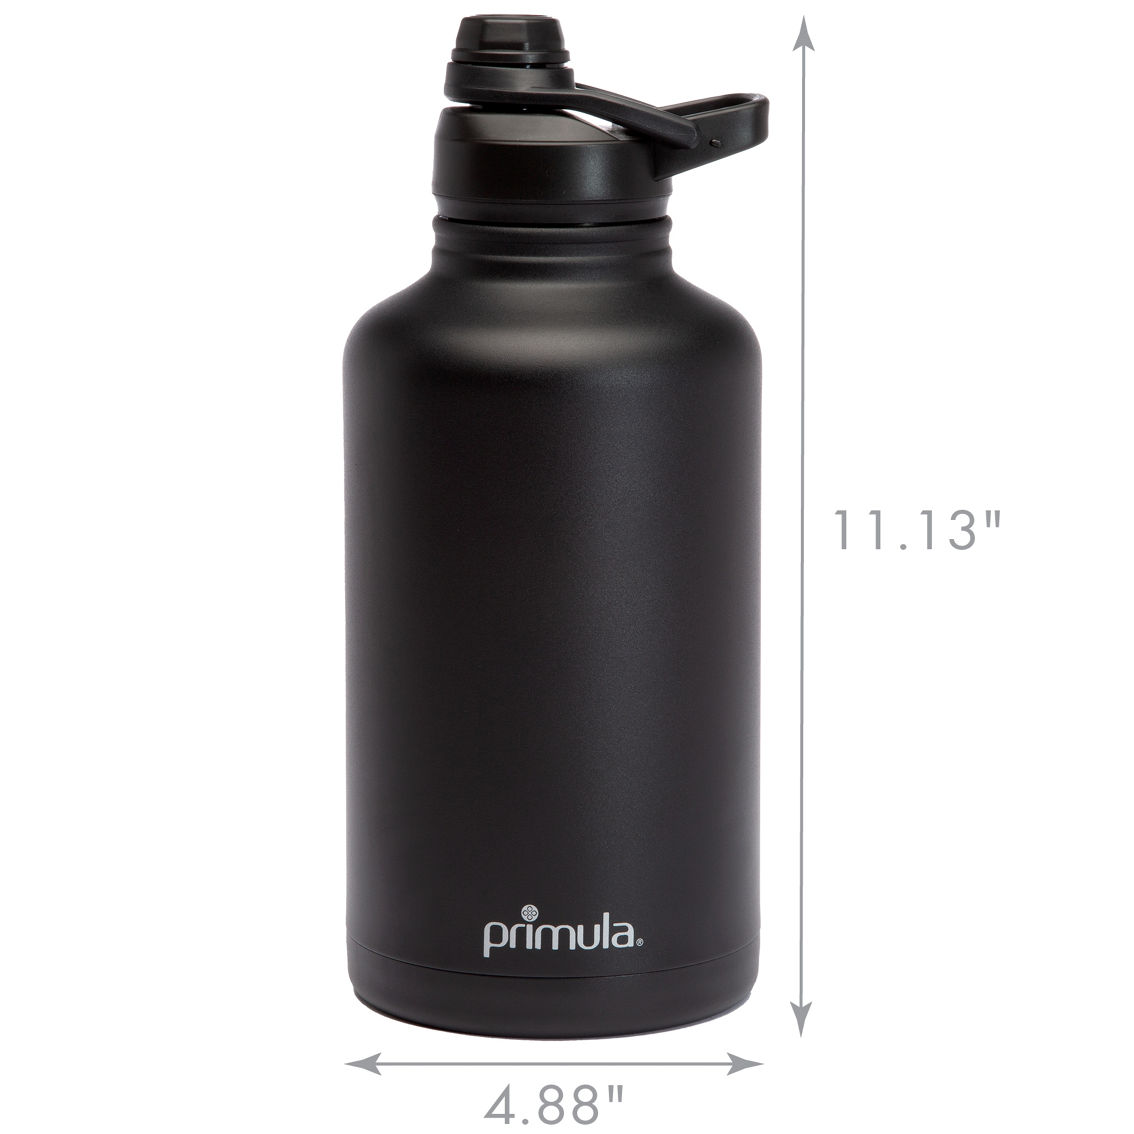 Primula Traveler Double Wall Vacuum Insulated Stainless Steel 64 oz. Bottle - Image 5 of 5